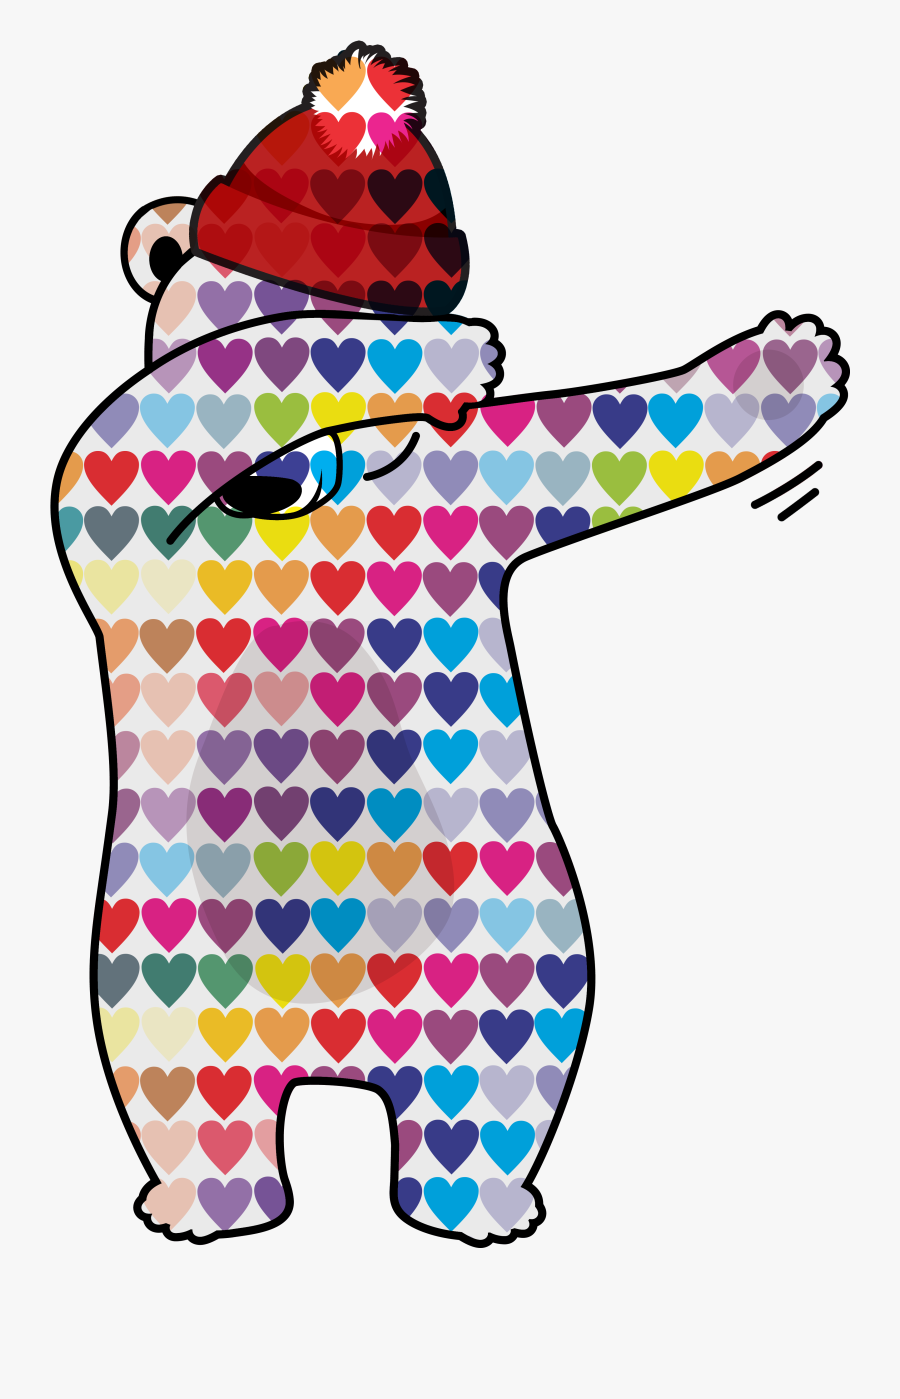 A Great Bear Design With Hearts And Red Bobble Hat - Corazones De Colores Fondo, Transparent Clipart